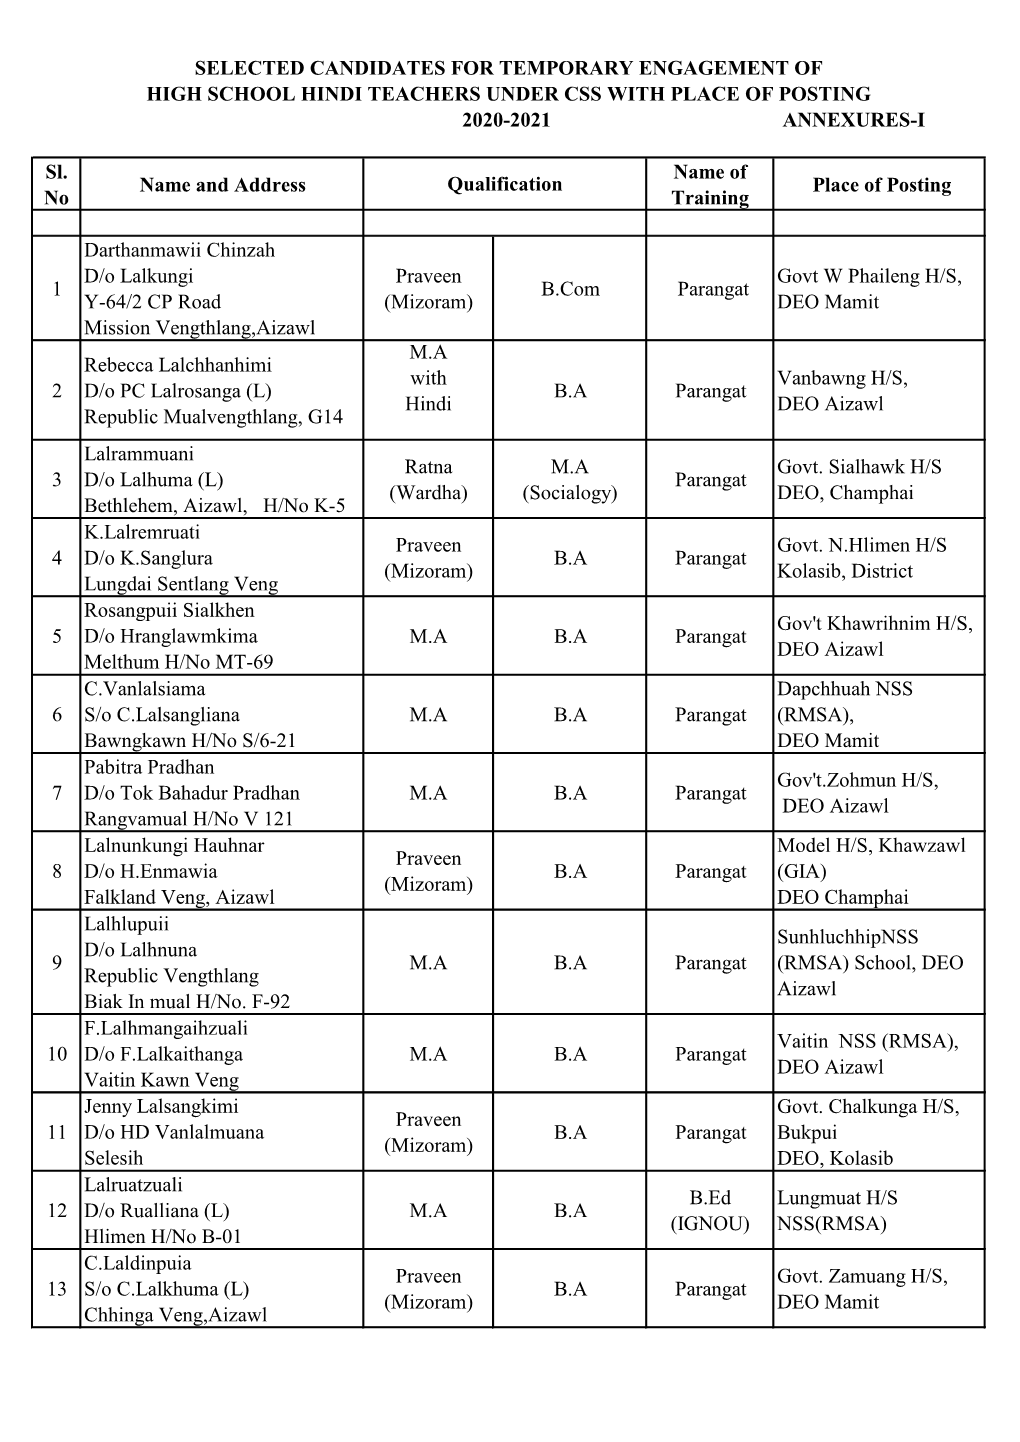 Selected Candidates for Temporary Engagement of High School Hindi Teachers Under Css with Place of Posting 2020-2021 Annexures-I